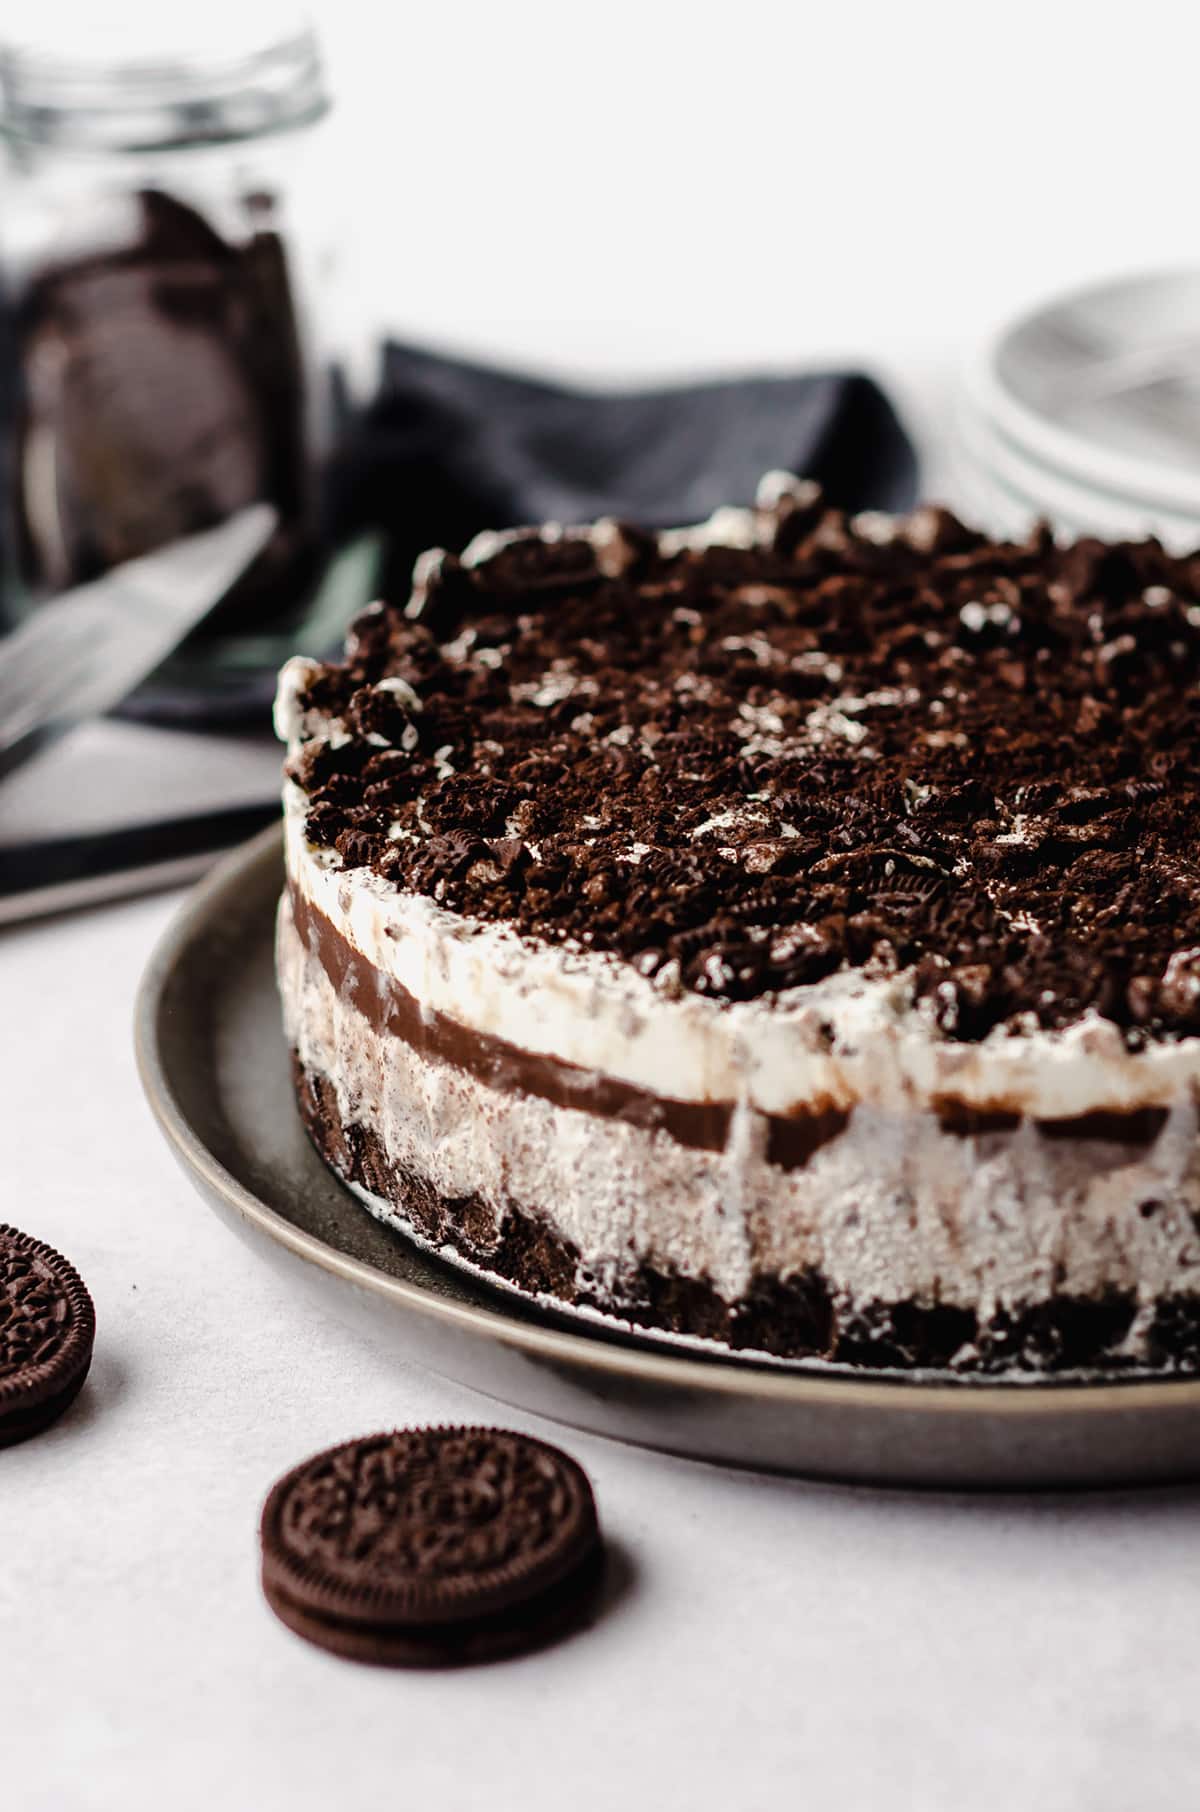 An ice cream cake with multiple layers and topped with Oreo cookies.